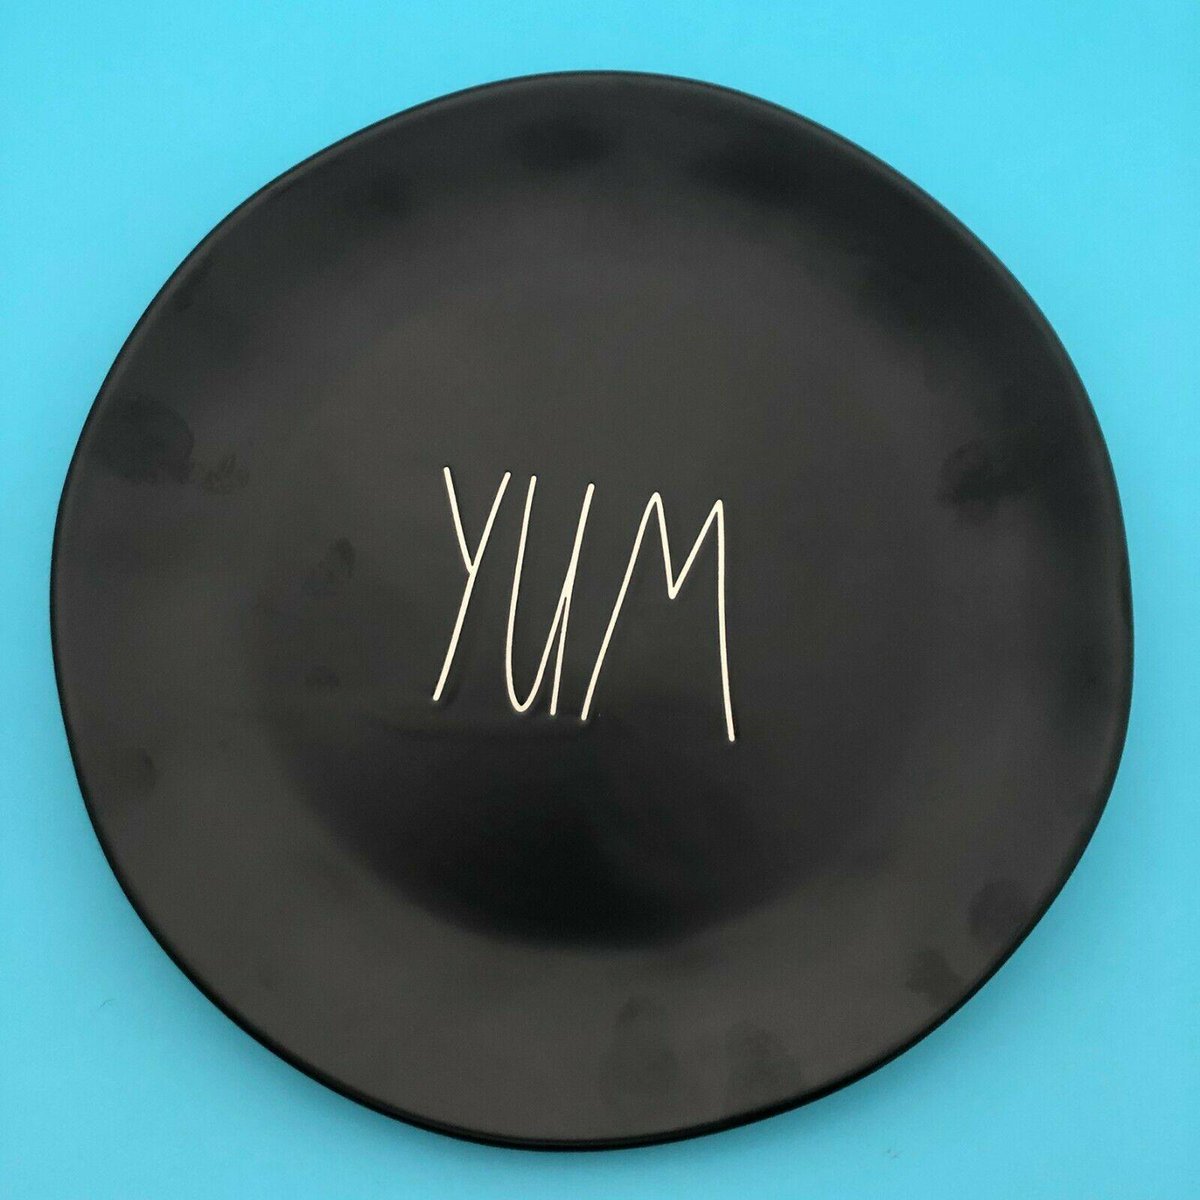 Have you broken one of your Rae Dunn Plates and need a replacement? Take a look - Dunn 'YUM' Black Dinner Plate New 11' diameter ebay.com/itm/2739492510…
#raedunn #raedunnplates #raedunndecor  #raedunnlove #raedunncollector #raedunncollection #raedunnmagenta #homedecor